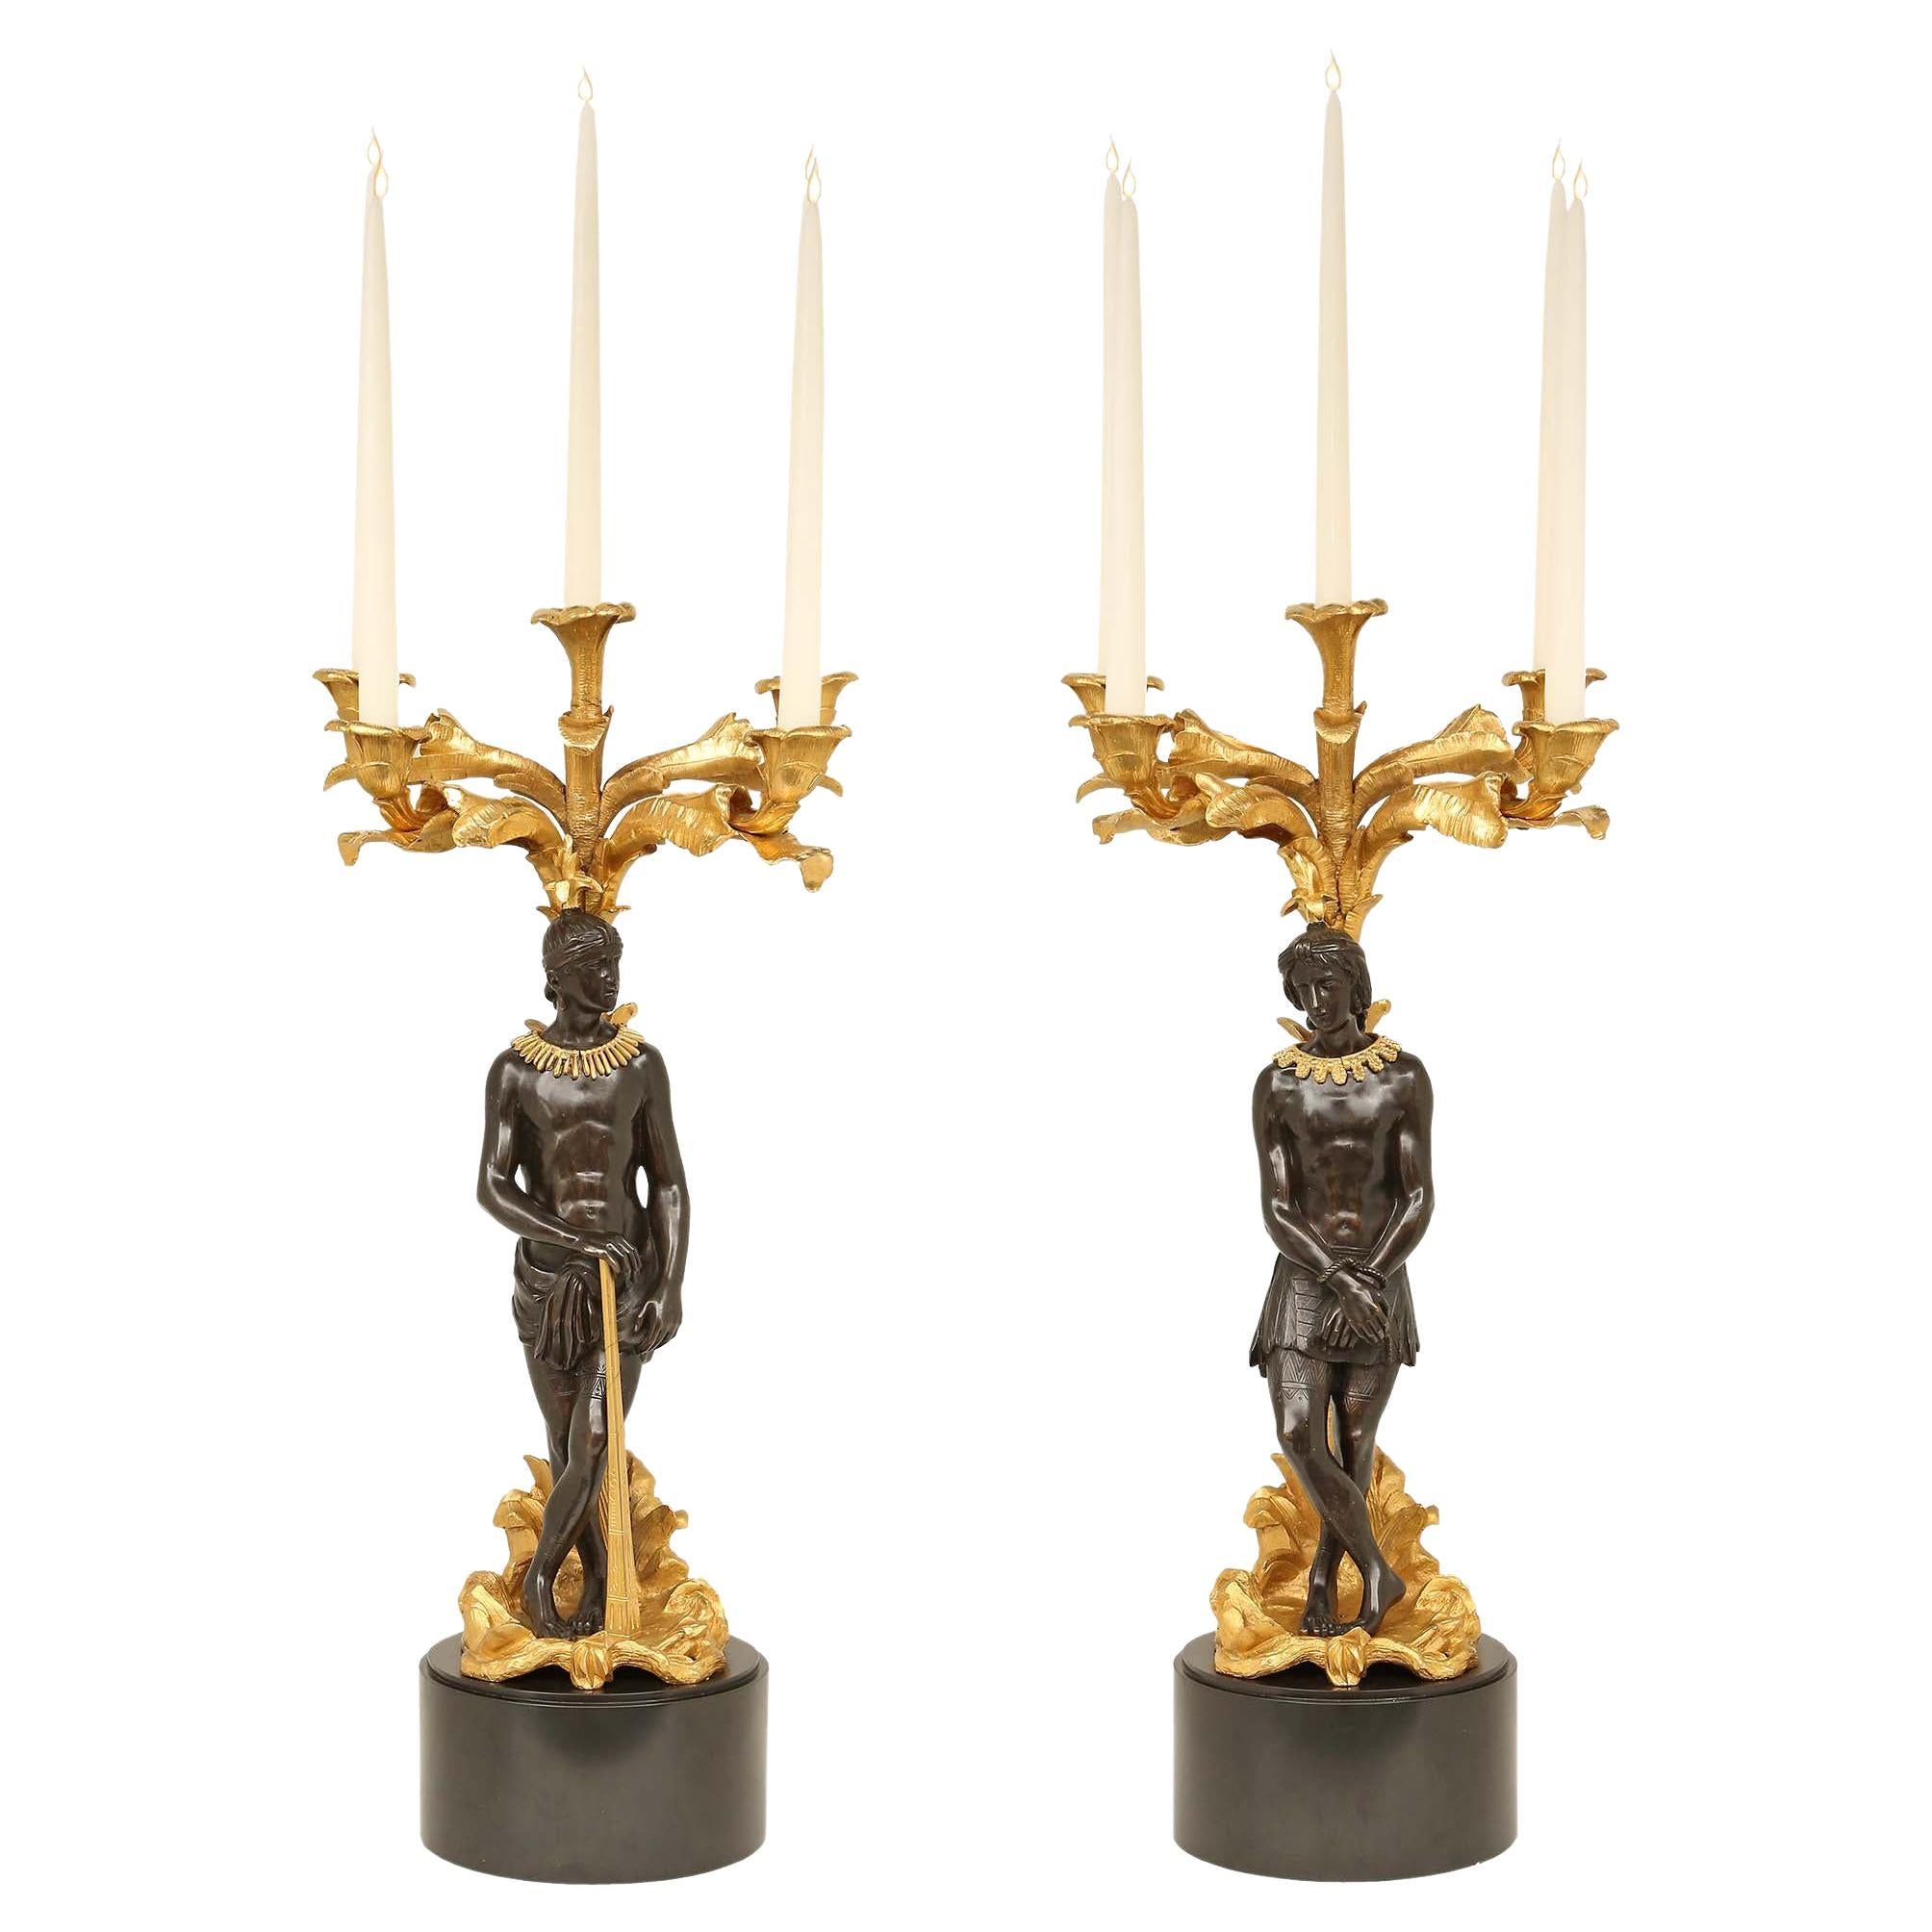 Pair of 19th Century Neoclassical St. Patinated Bronze and Ormolu Candelabras